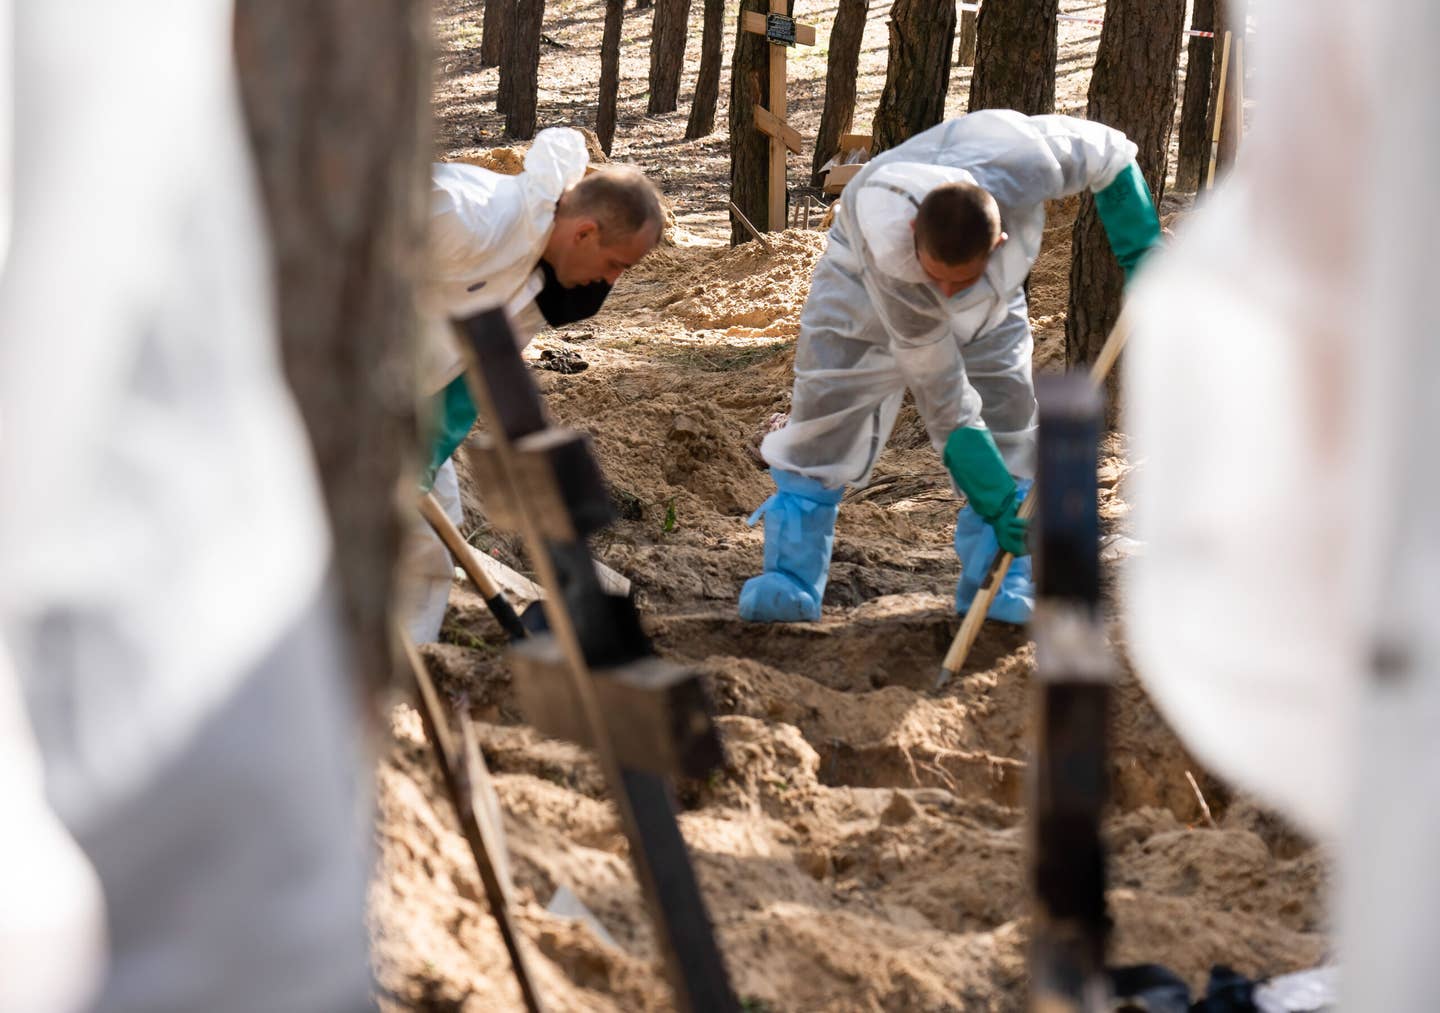 Investigators wearing protective gear are seen exhuming bodies with shovels. A mass burial site was found on the outskirt of the eastern Ukrainian city, Izium, Kharkiv region, which was liberated from Russian occupation. (Photo by Ashley Chan/SOPA Images/LightRocket via Getty Images)